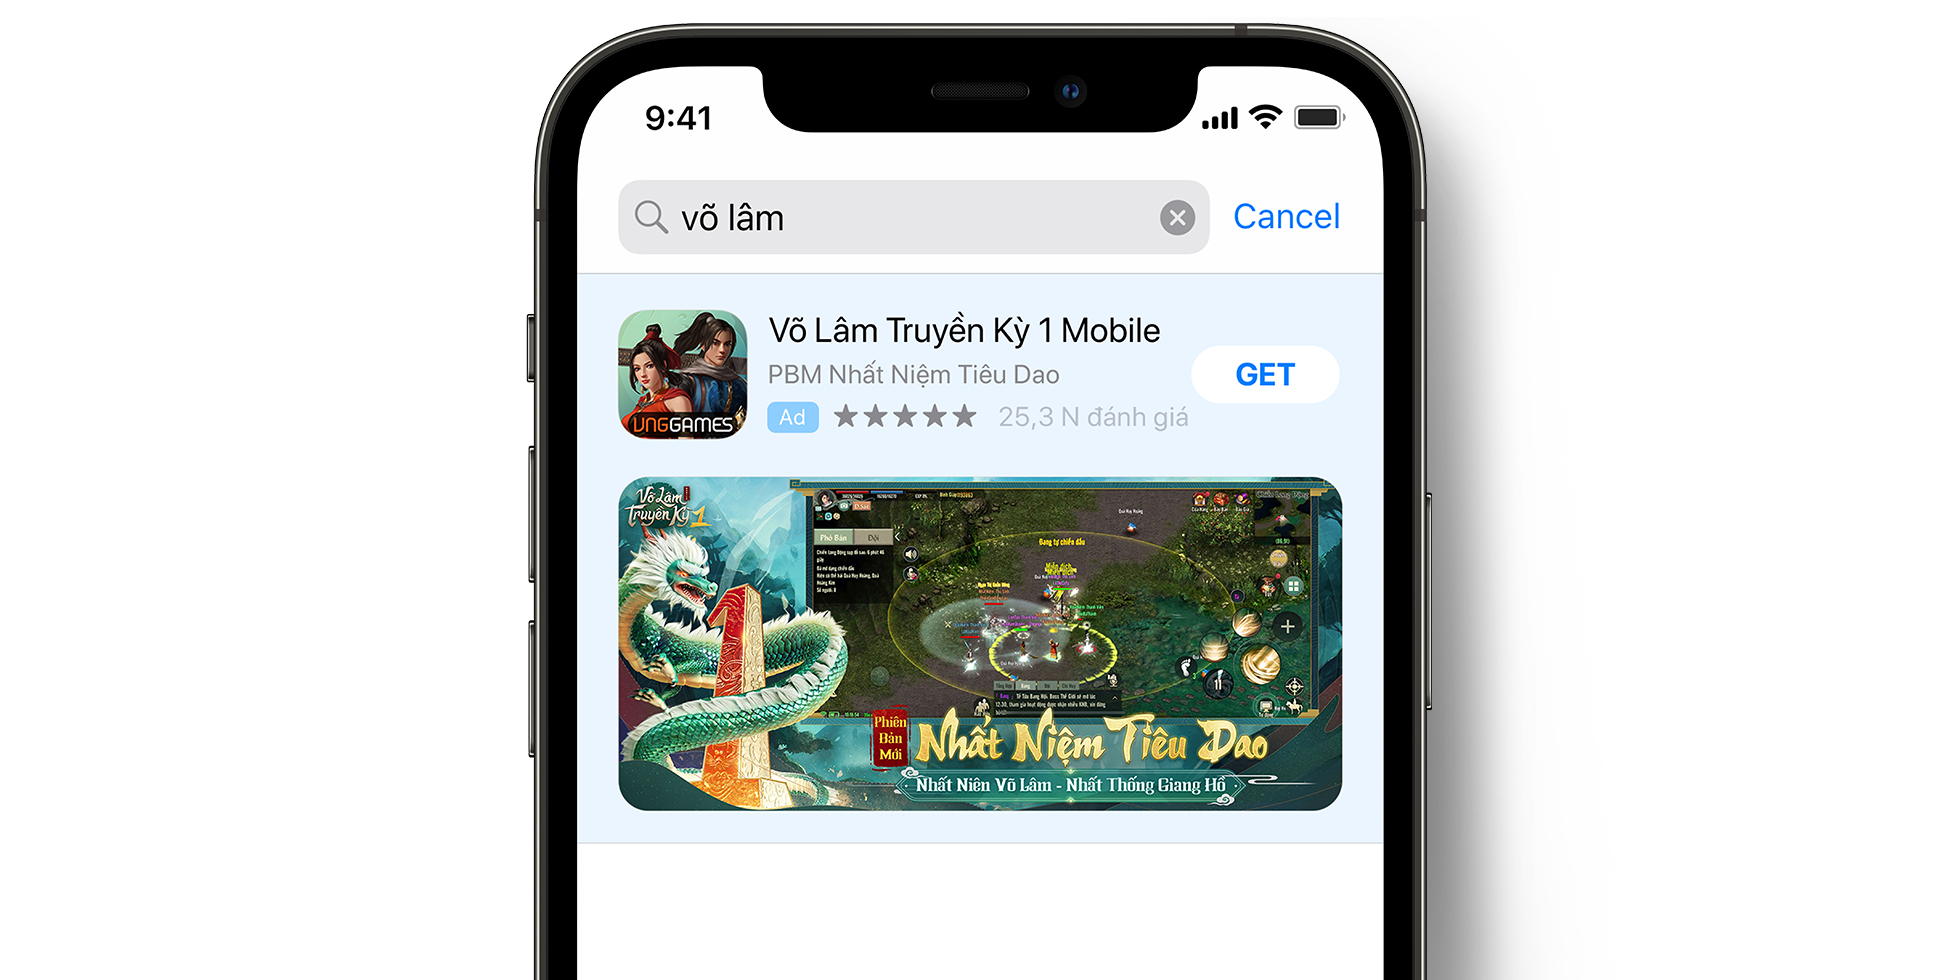 VLTK 1 Mobile ad on the App Store